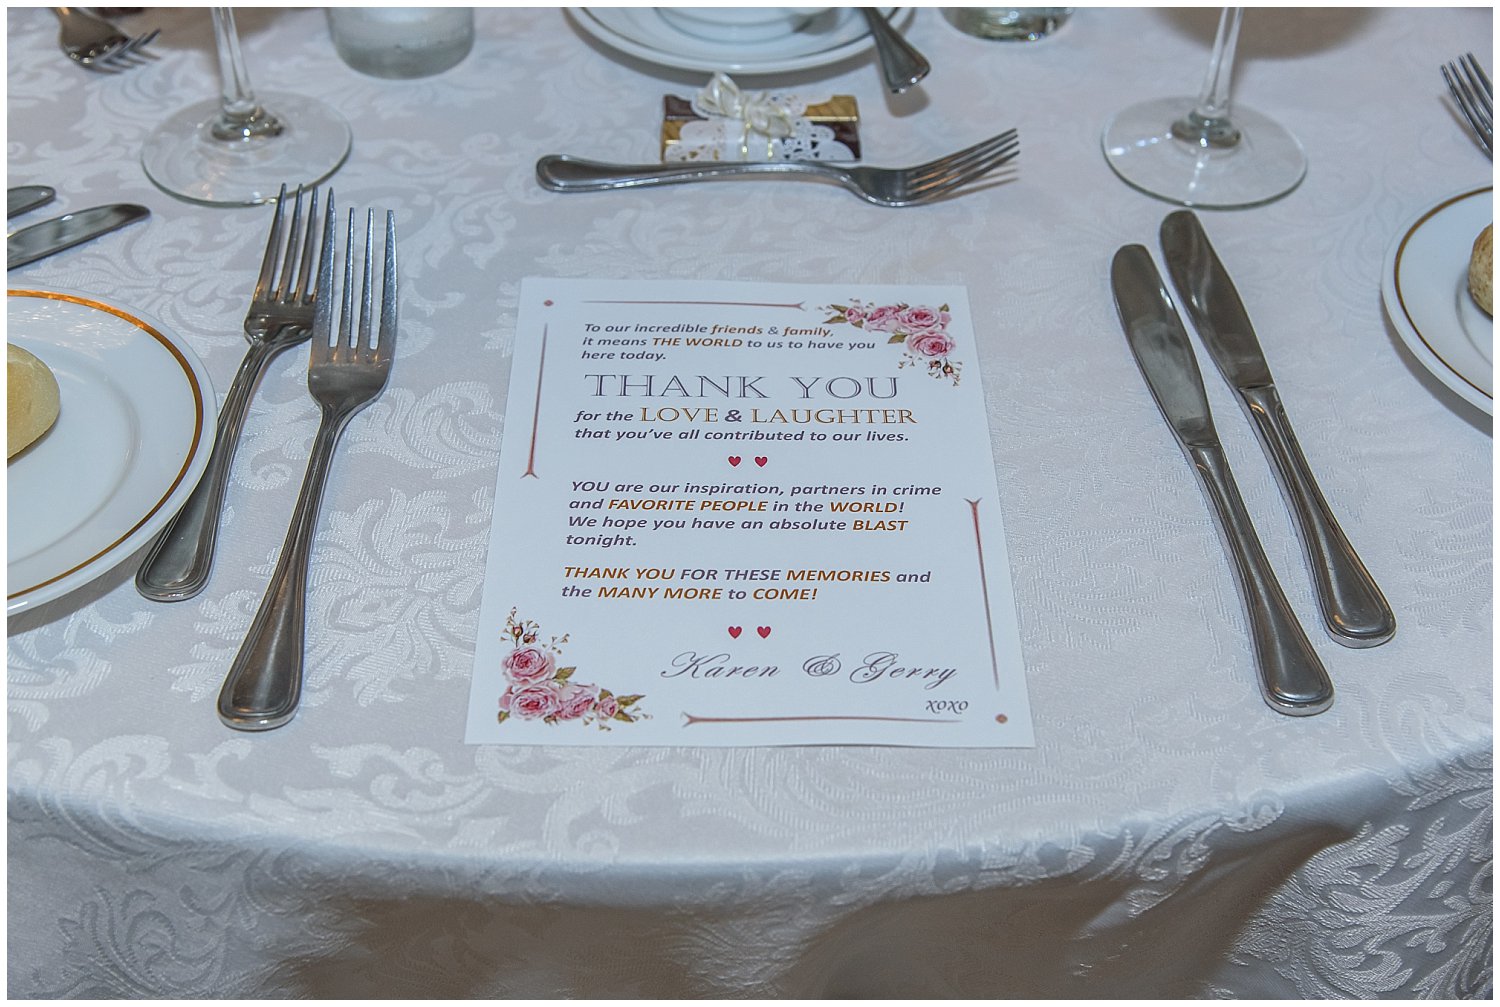 The place setting at a wedding prepared by the day of coordinator at the Lord Nelson Hotel in Halifax, NS.